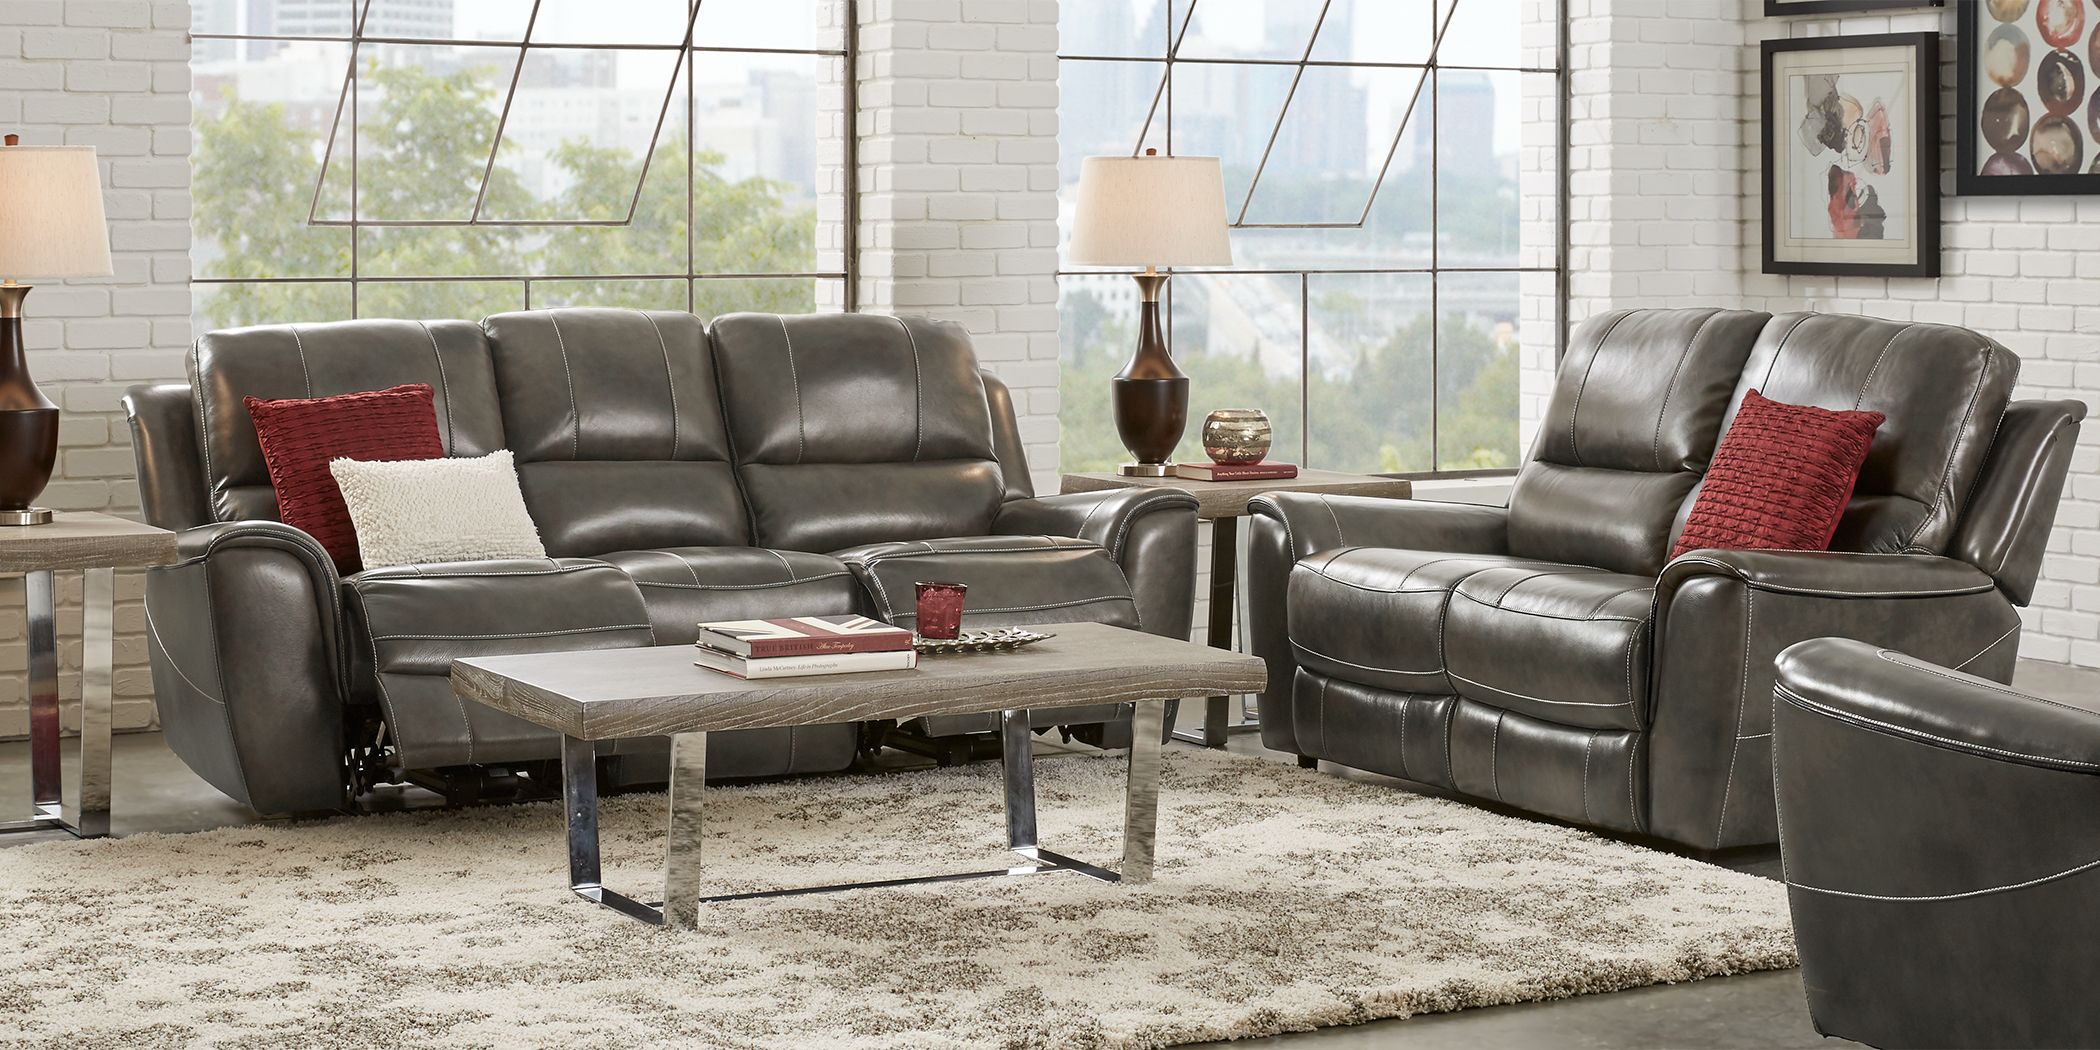 rooms to go leather sofa beds